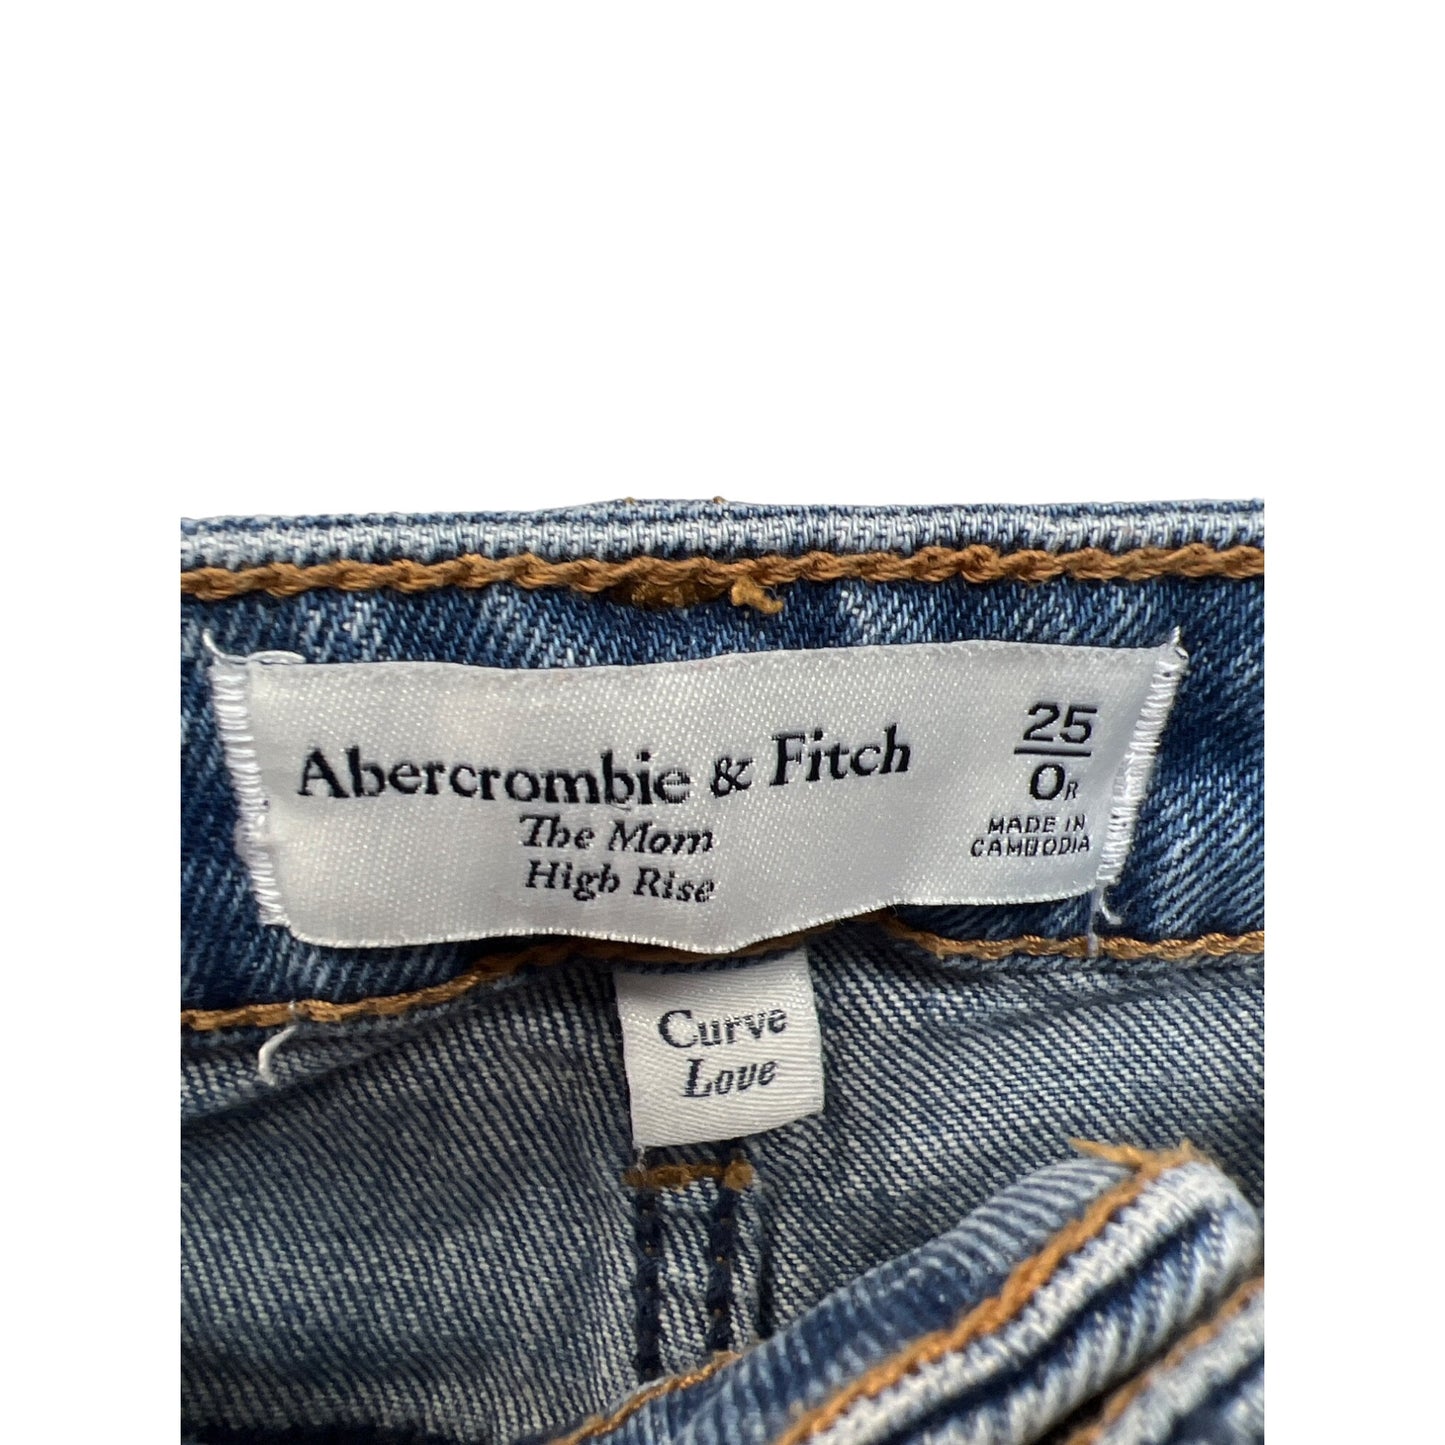 Abercrombie & Fitch The Mom High Rise Curve Love Distressed Jeans 25